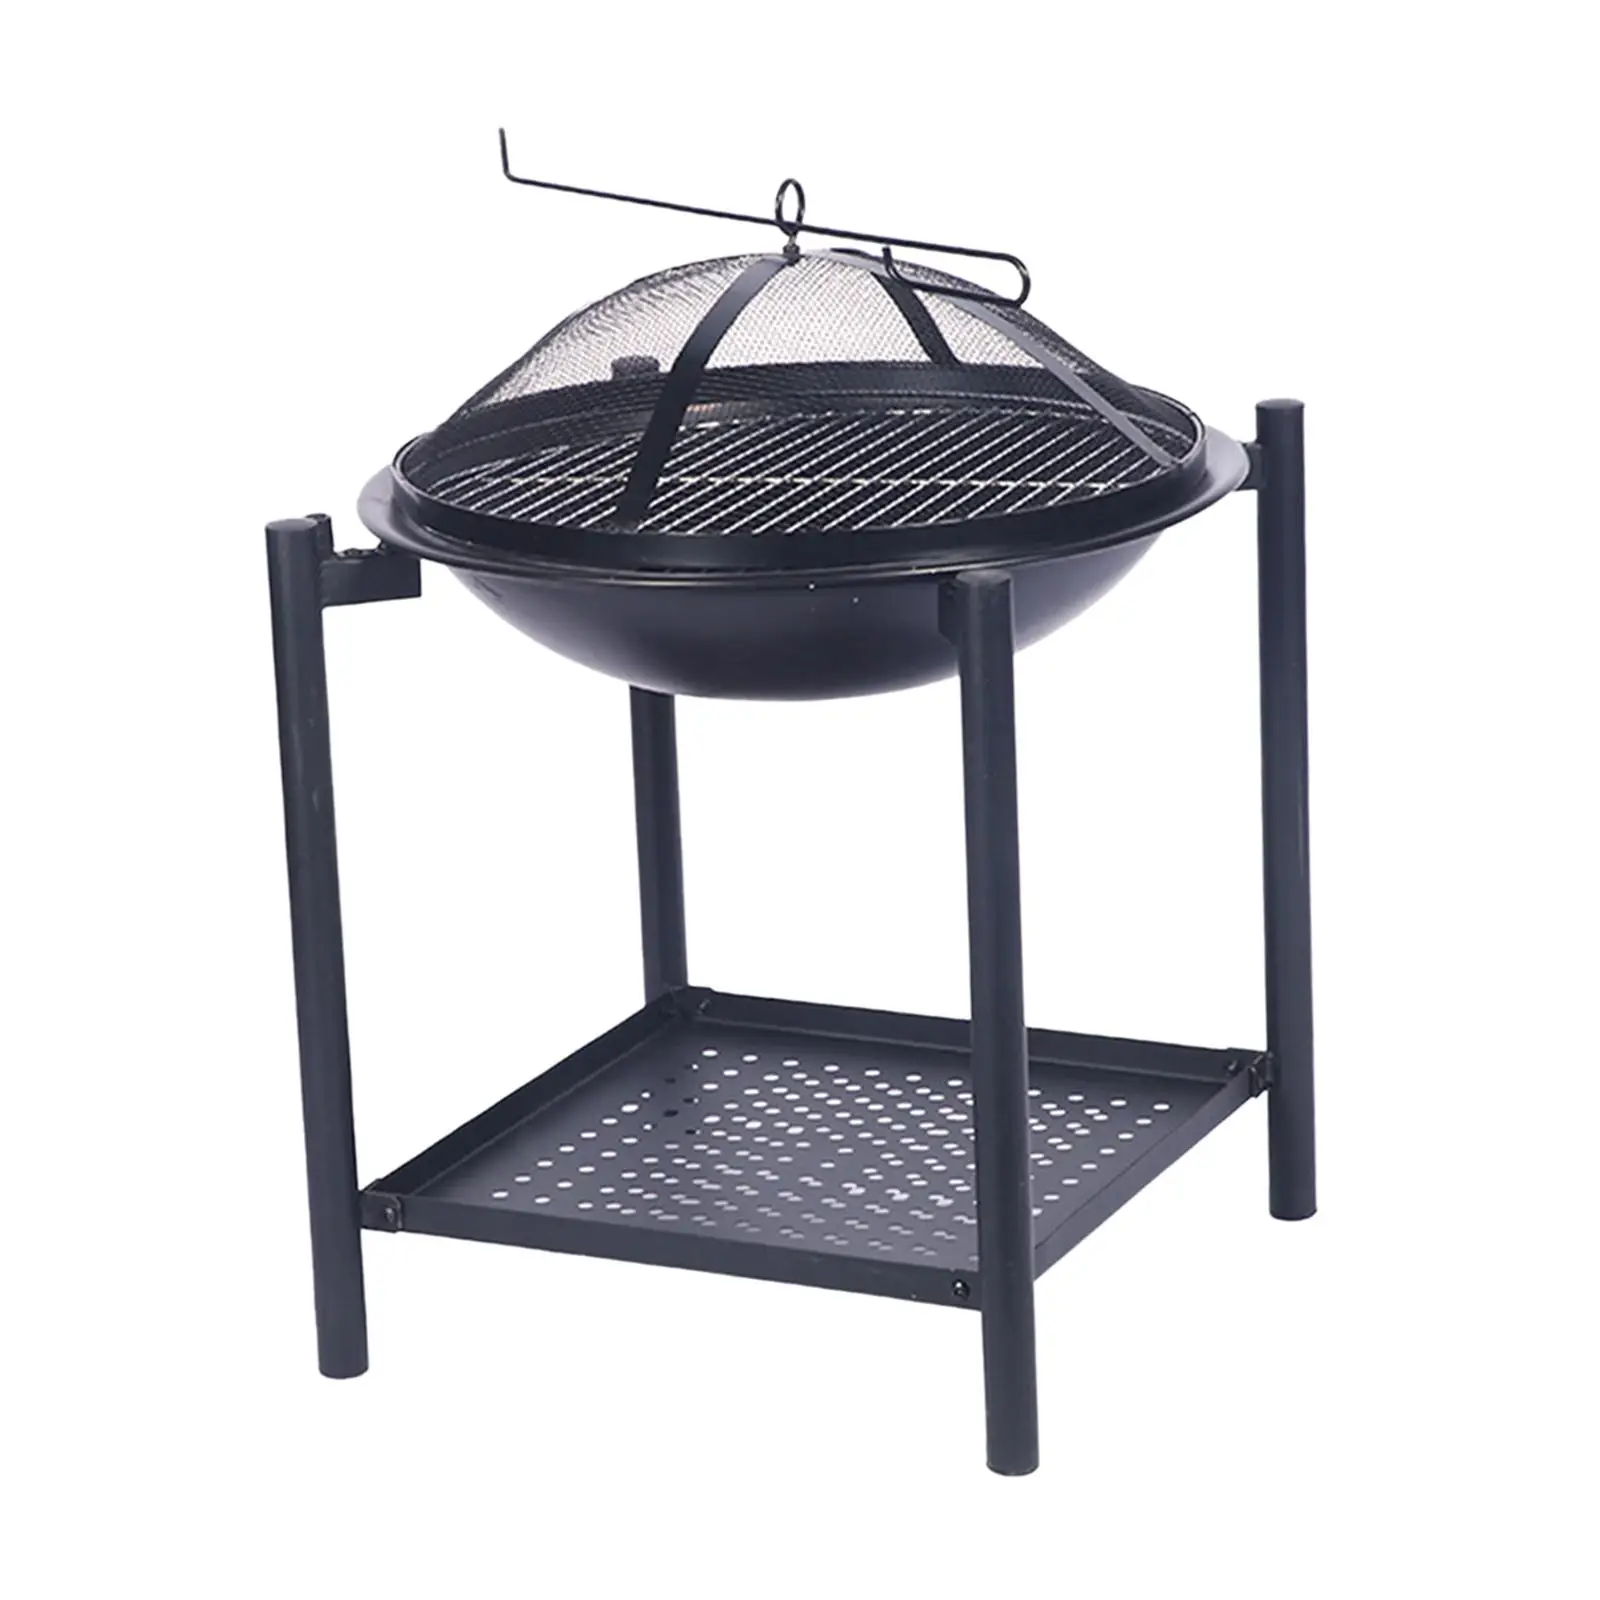 Fire Pit with Mesh Spark Screen Wood Burning Easy to Assemble with Grill with Storage Compartment for Wood Heater for Barbecue